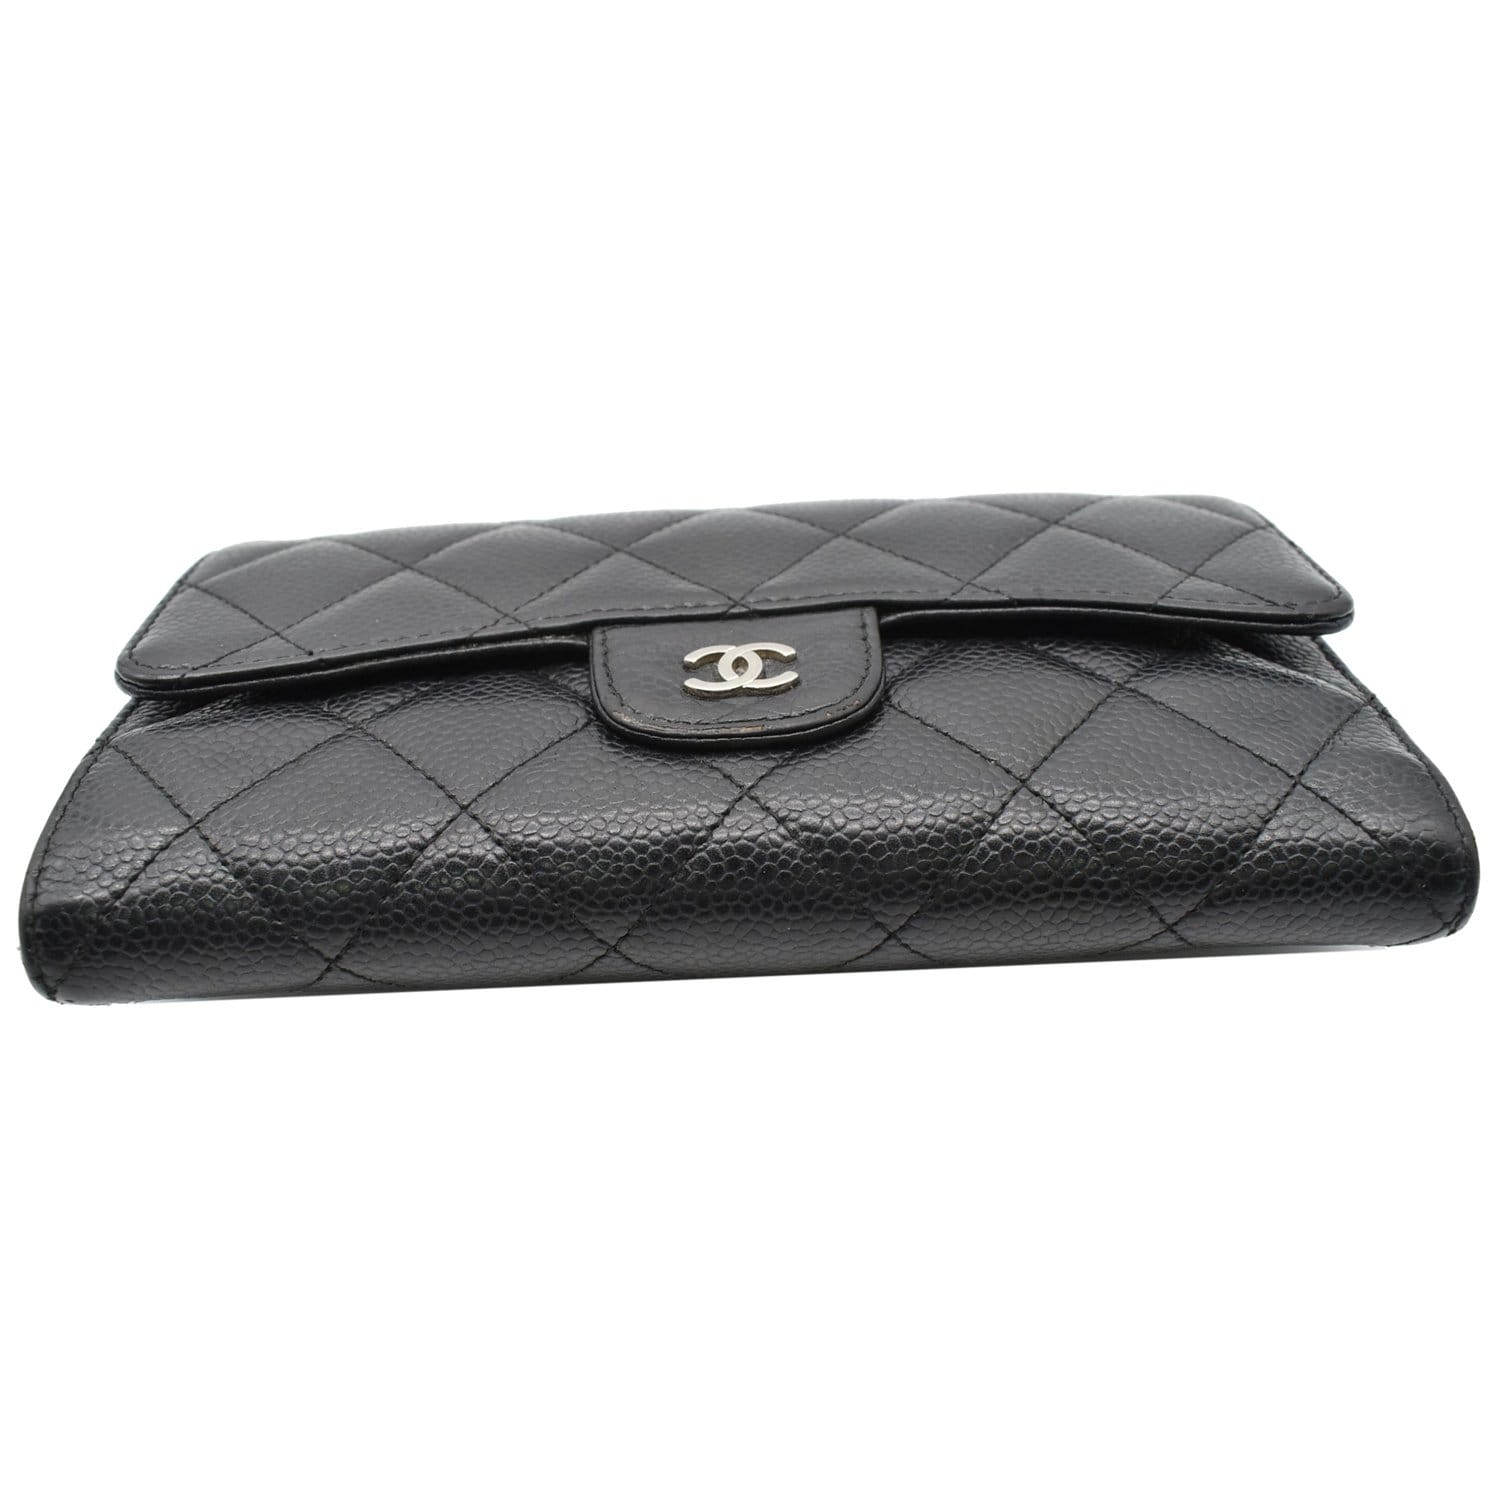 Chanel Classic Flap Card Holder Black Caviar Silver Hardware – Coco  Approved Studio